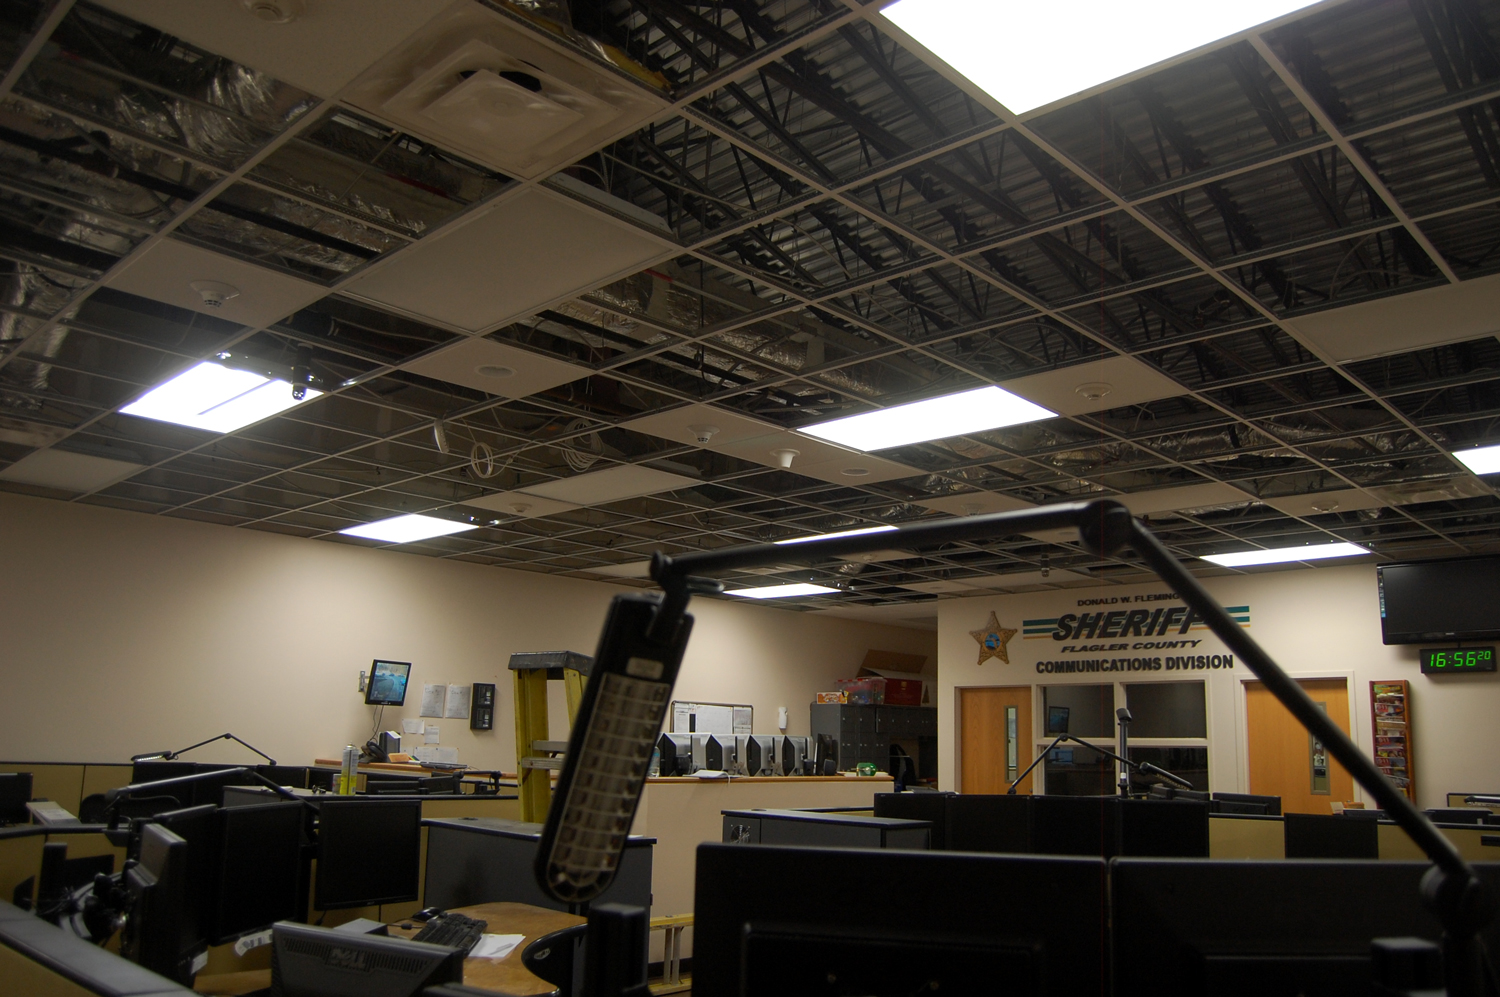 Most of the 911 call center's ceiling tiles were blown out by the downward draft of the fire suppression system. Click on the image for larger view. (© FlaglerLive)